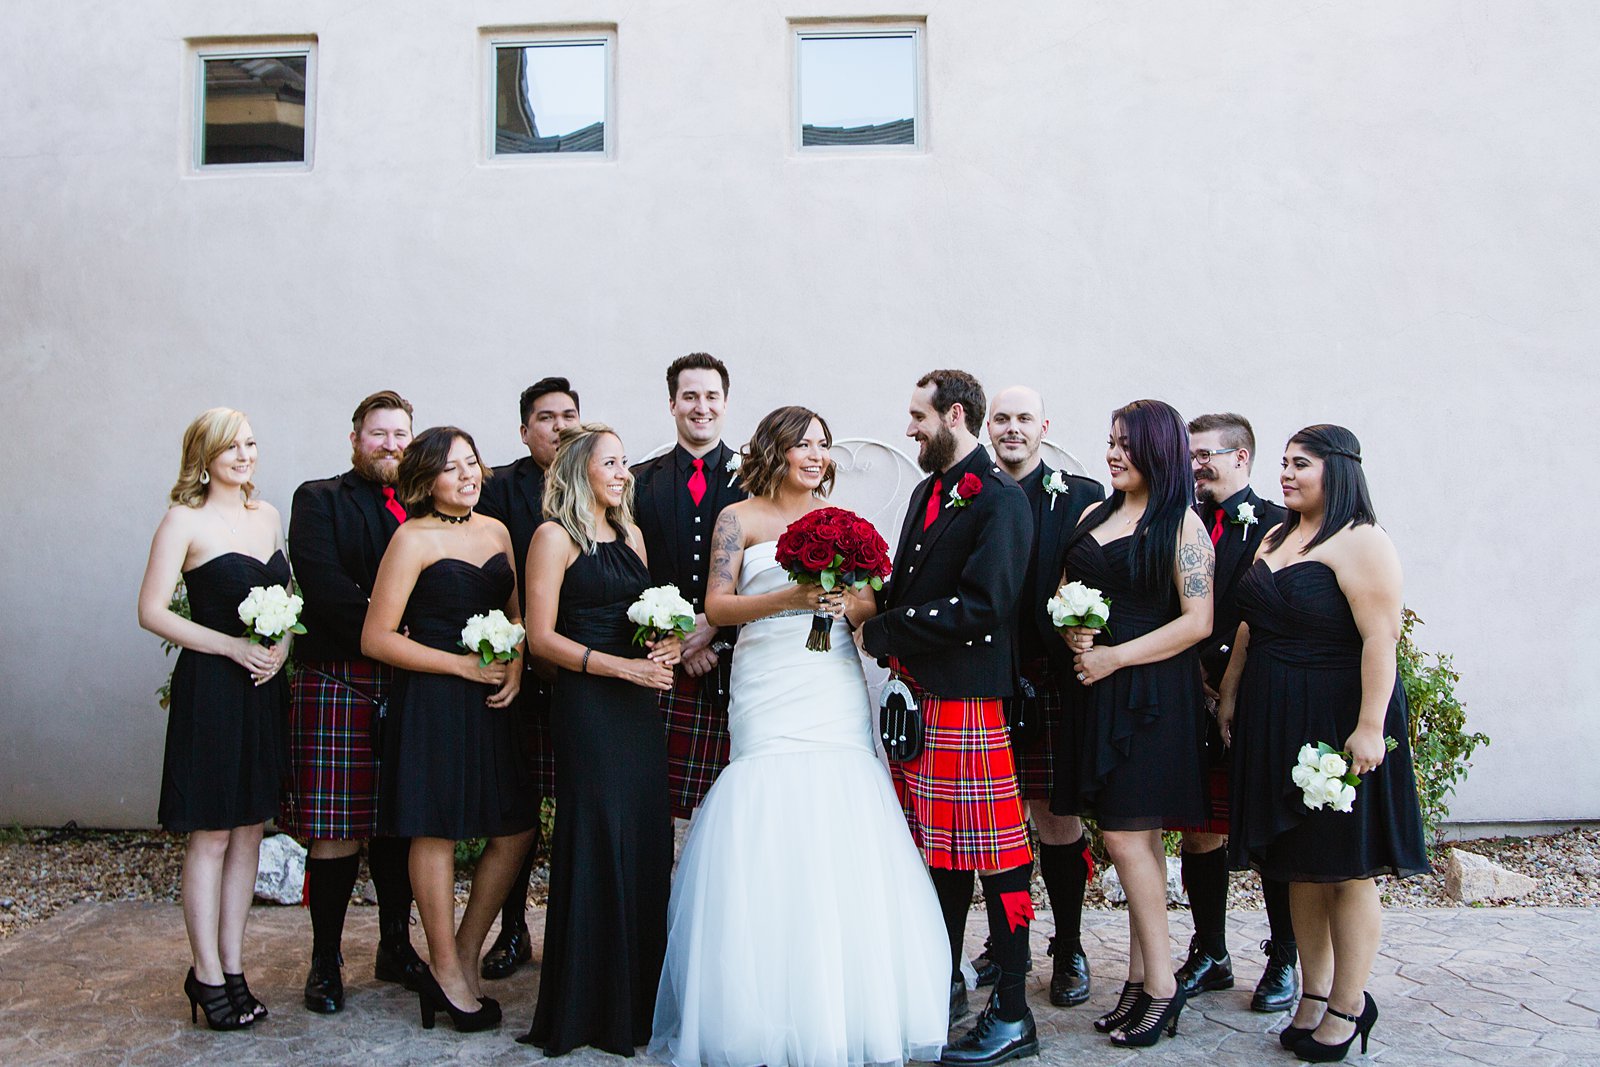 Classic black and red wedding party with the groomsmen in Scottish kilts by Arizona wedding photographer PMA Photography.